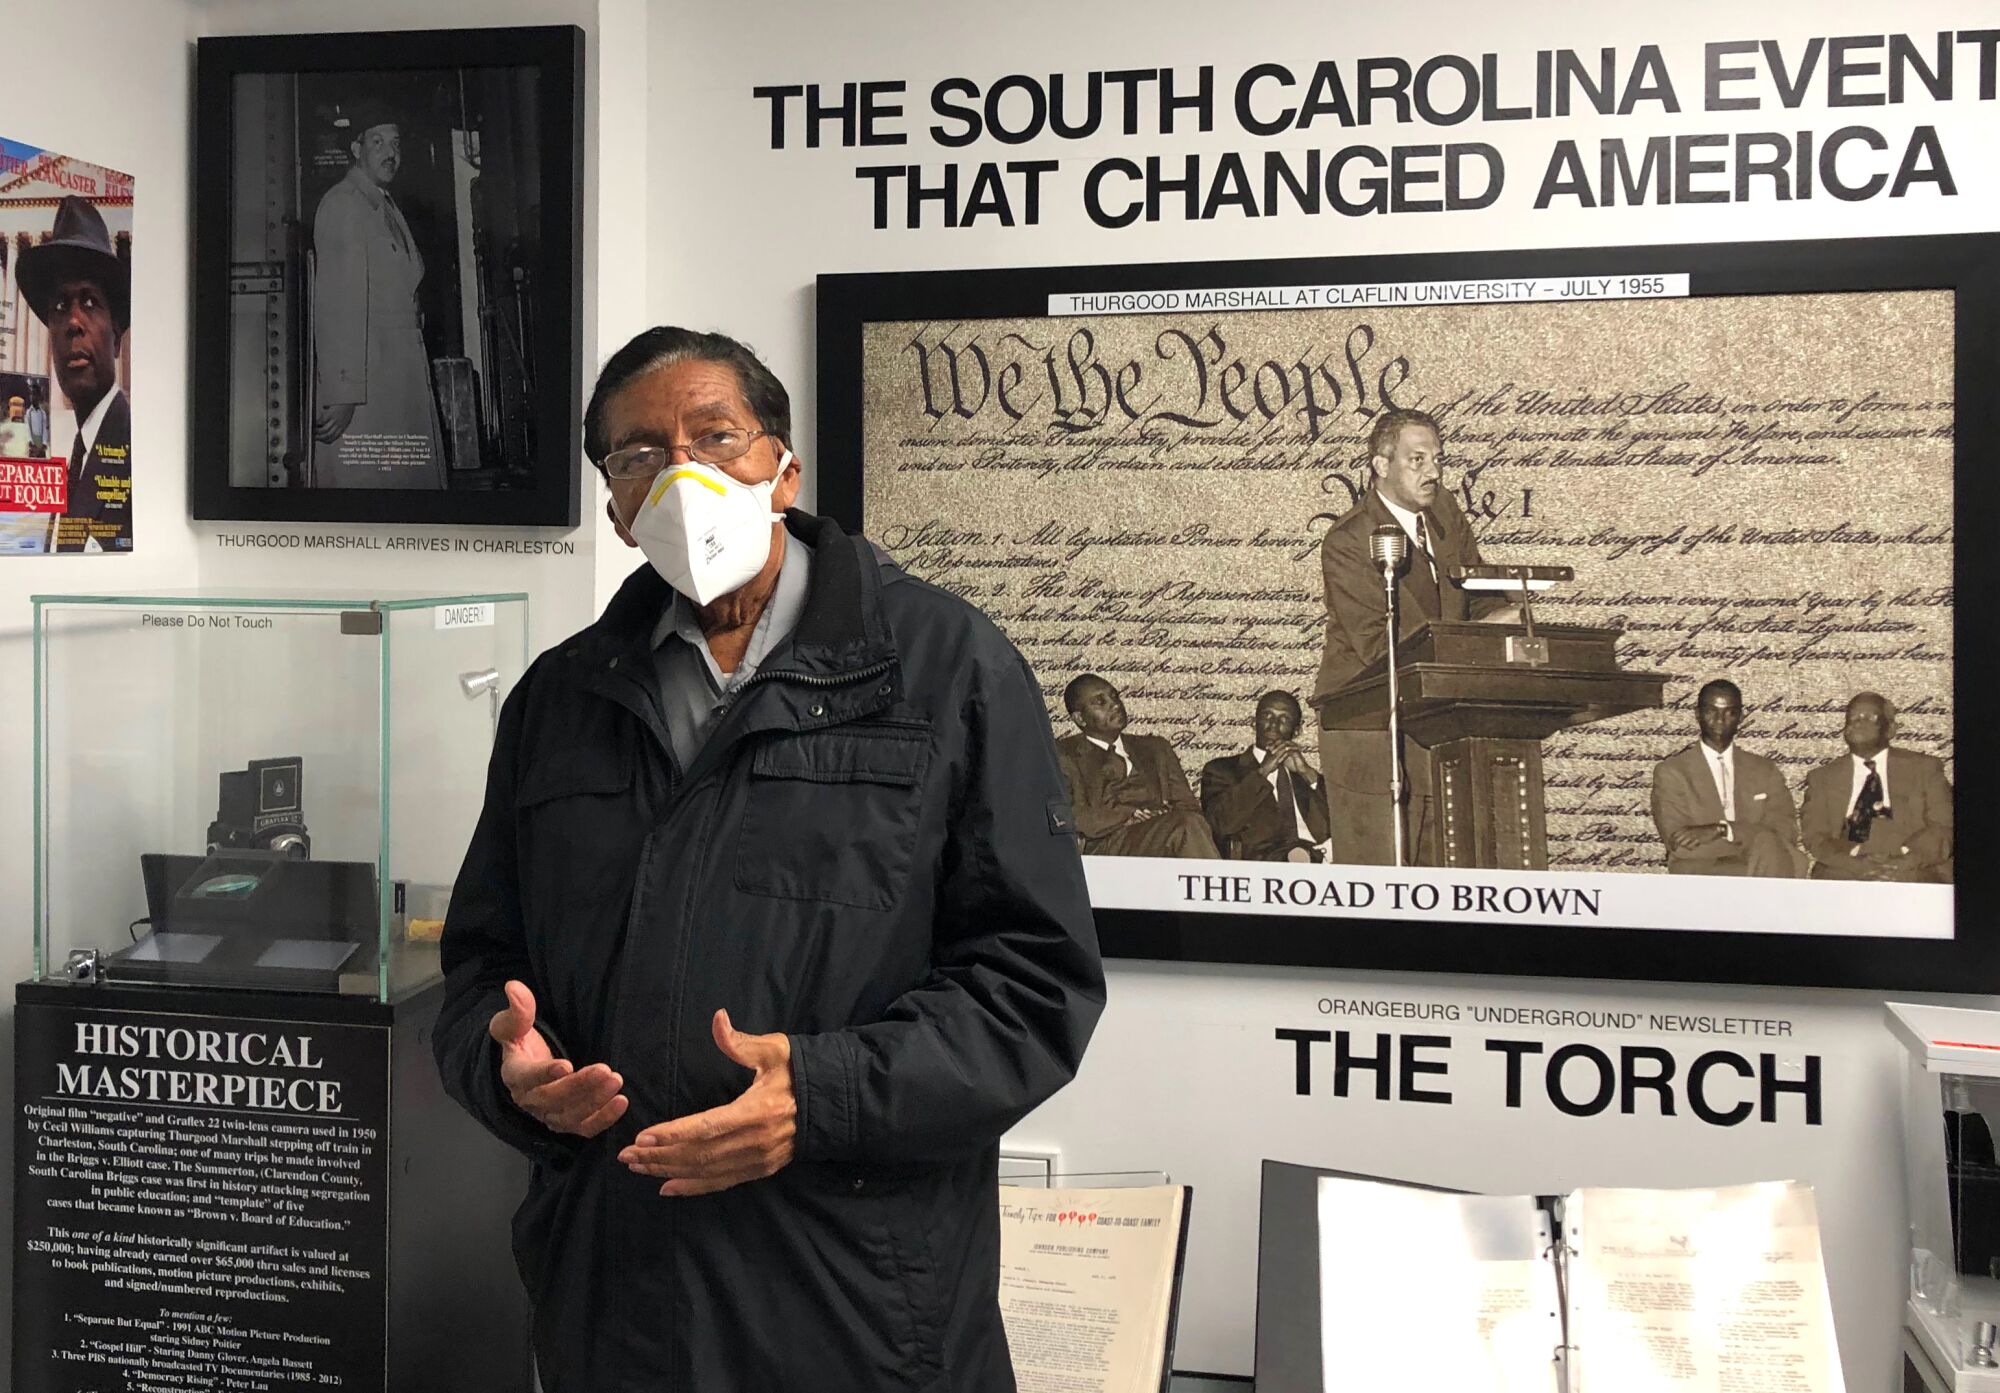 Cecil Williams stands in front of a museum display.